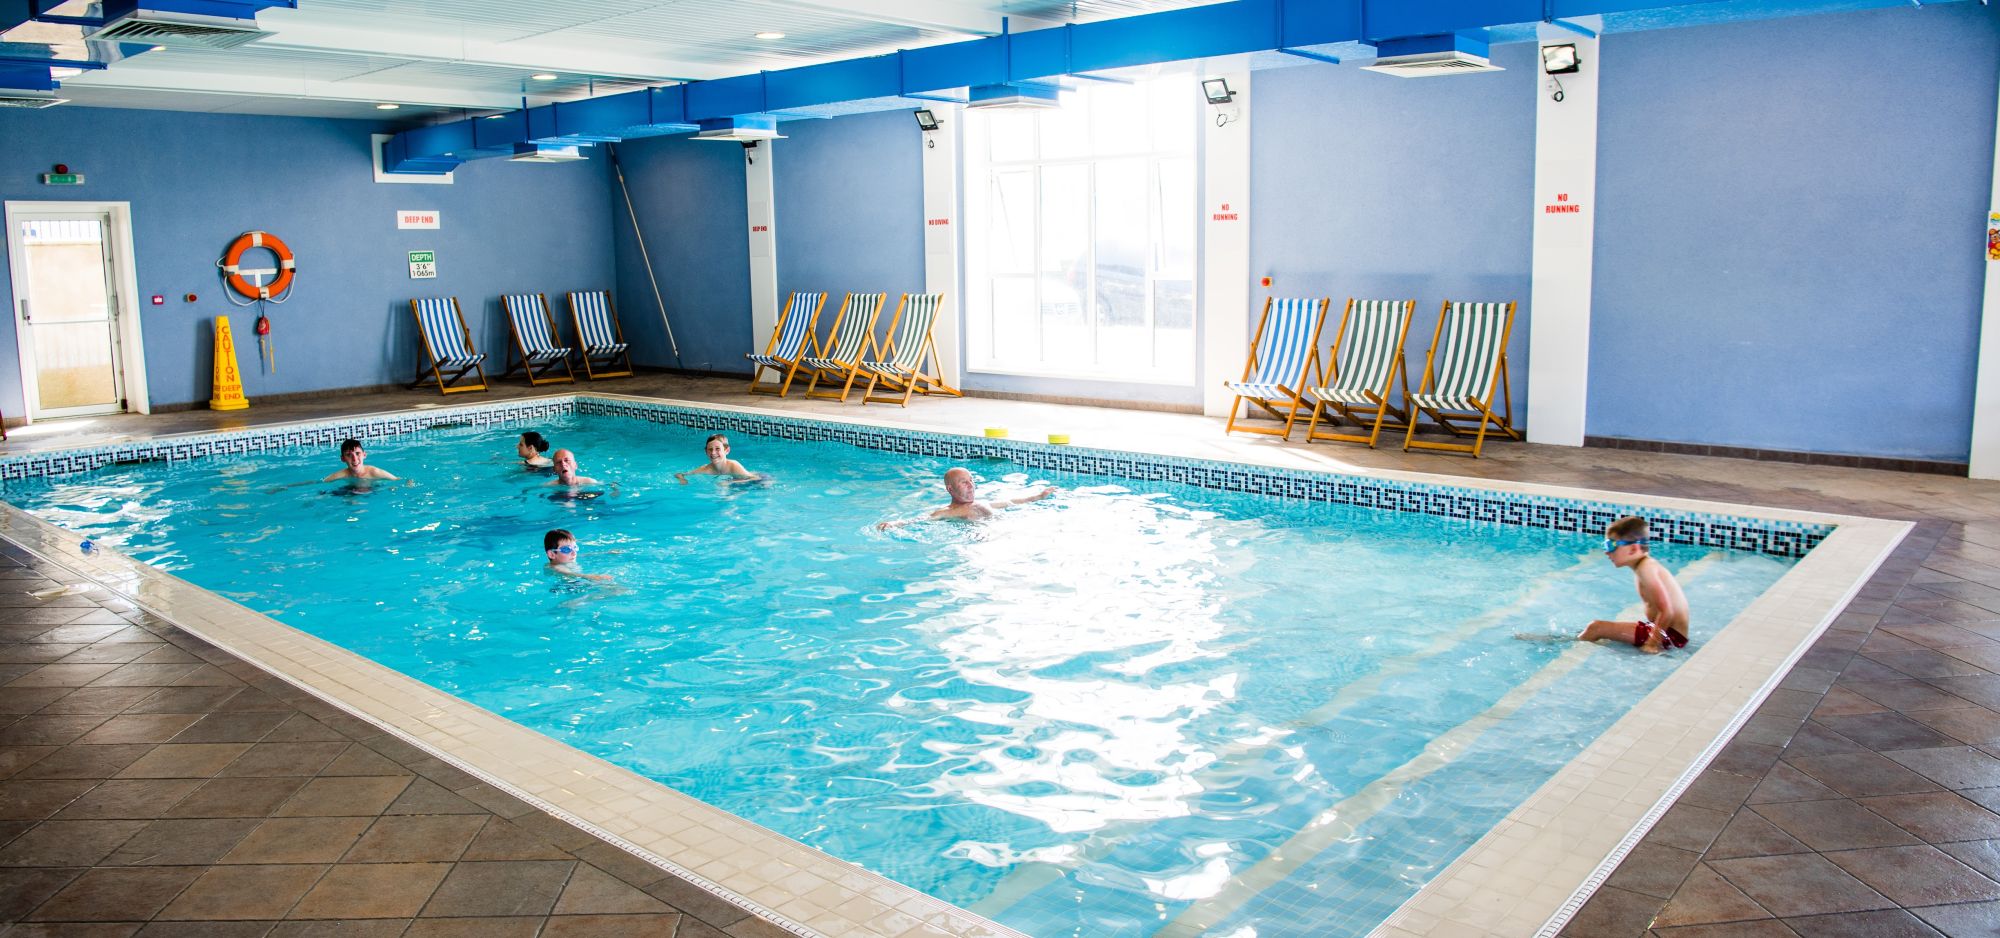 The indoor swimming pool at Clarach Bay